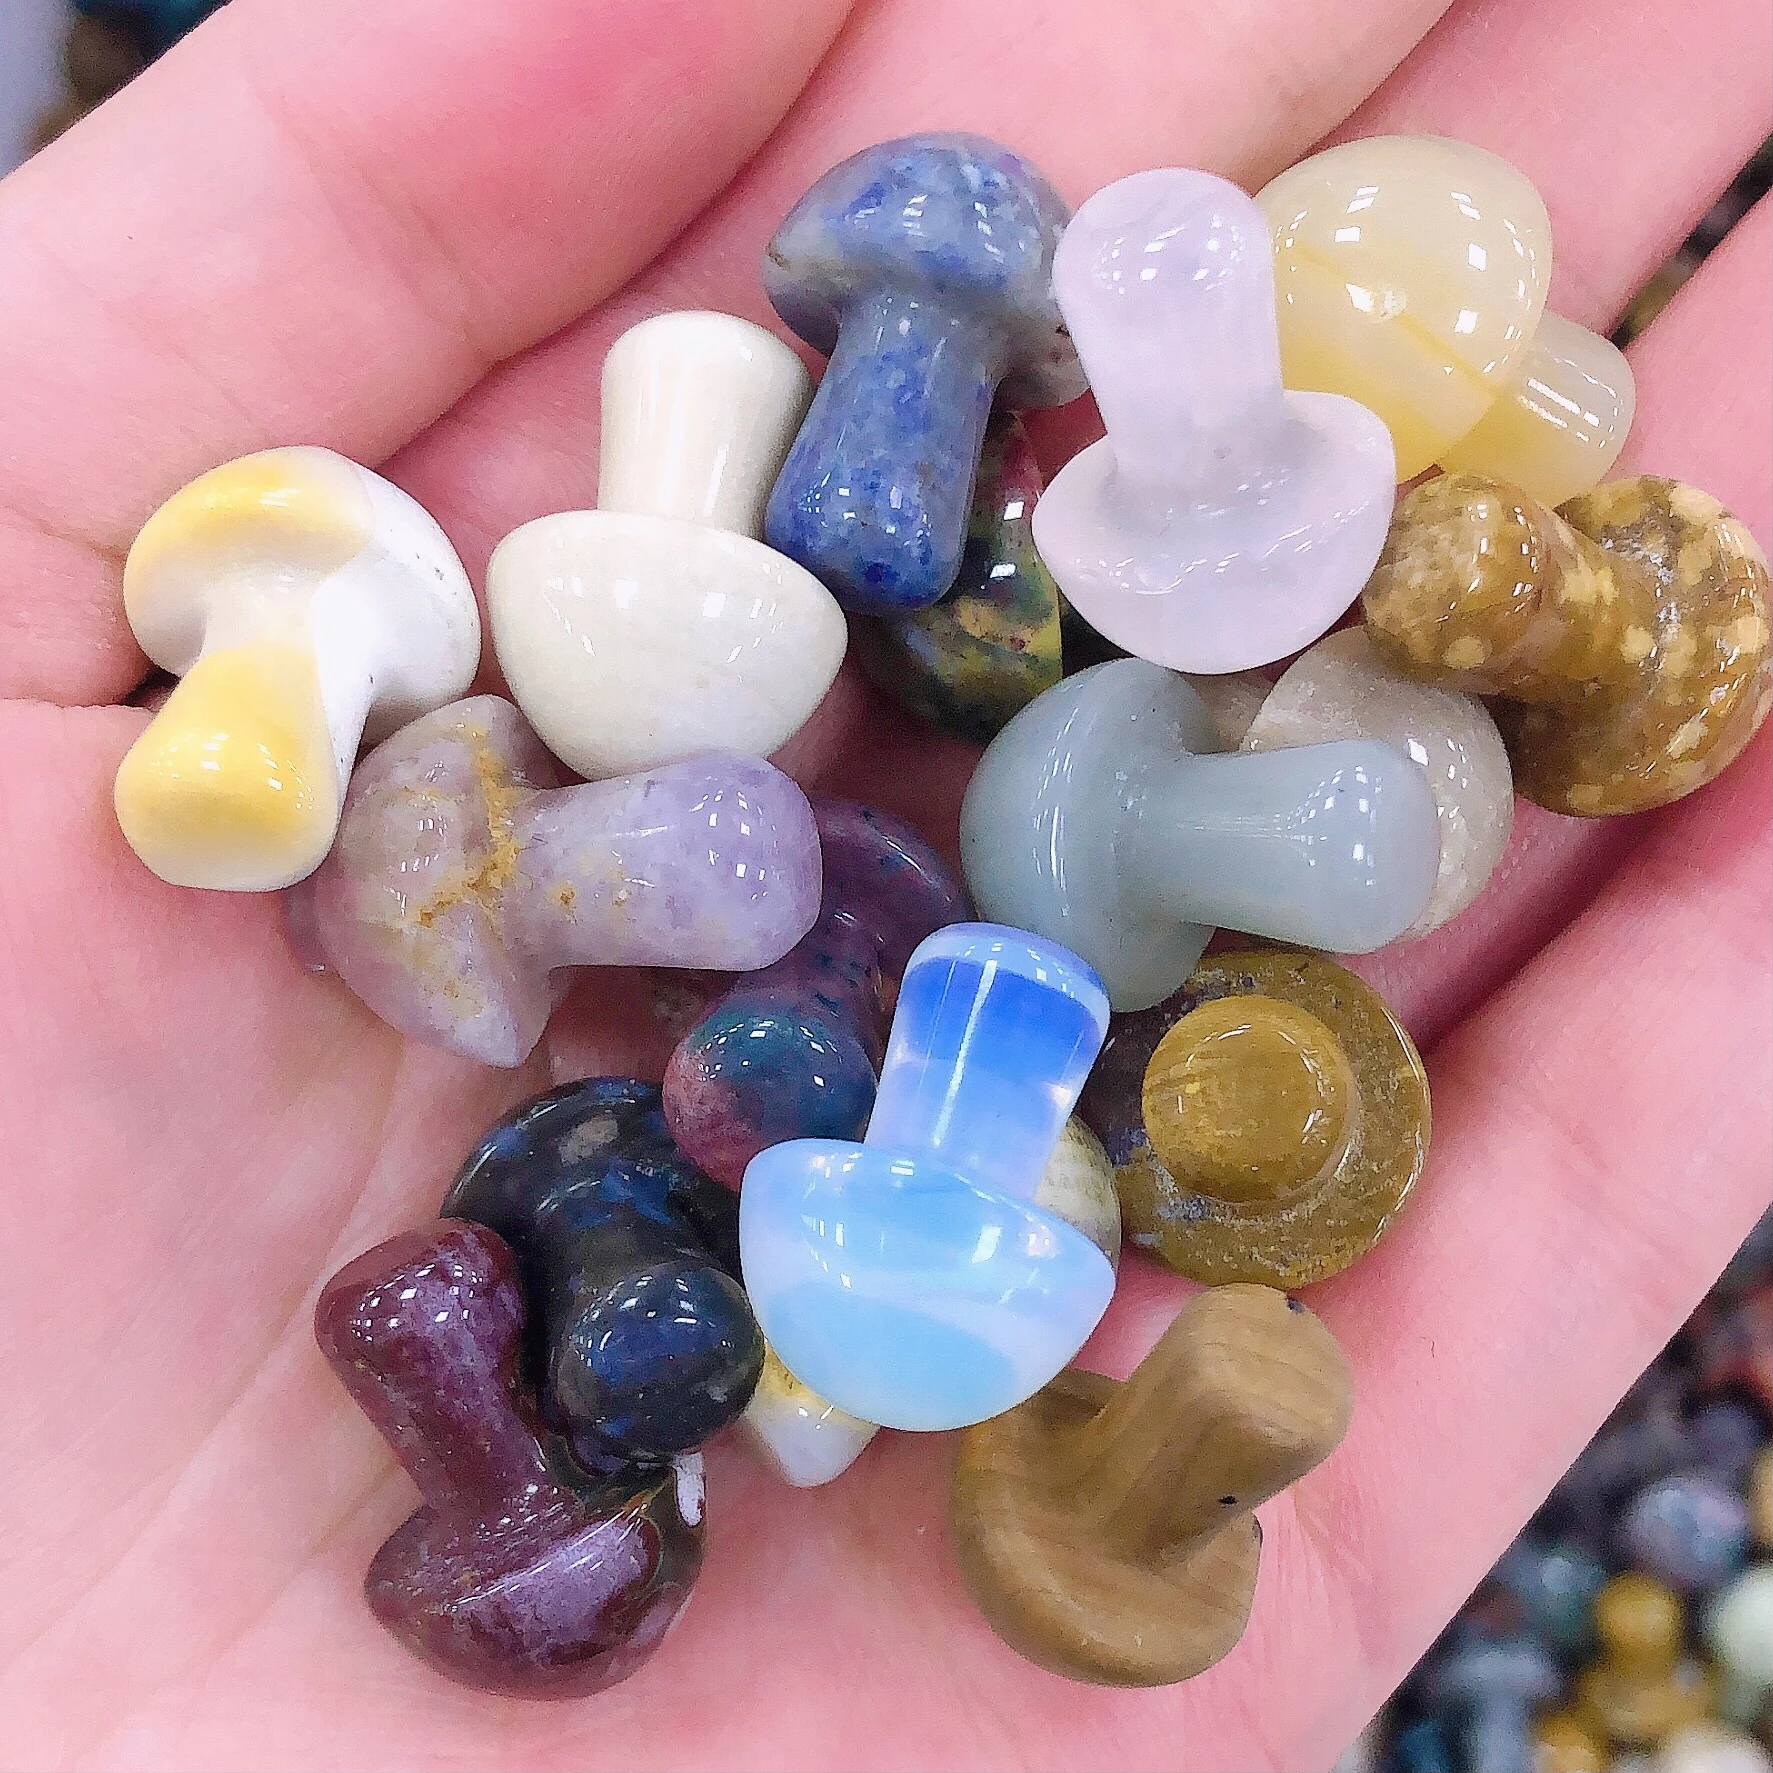 Wholesale High Quality Reiki Small Mix Mushroom Folk Crafts Healing Rough Natural Stones And Crystal